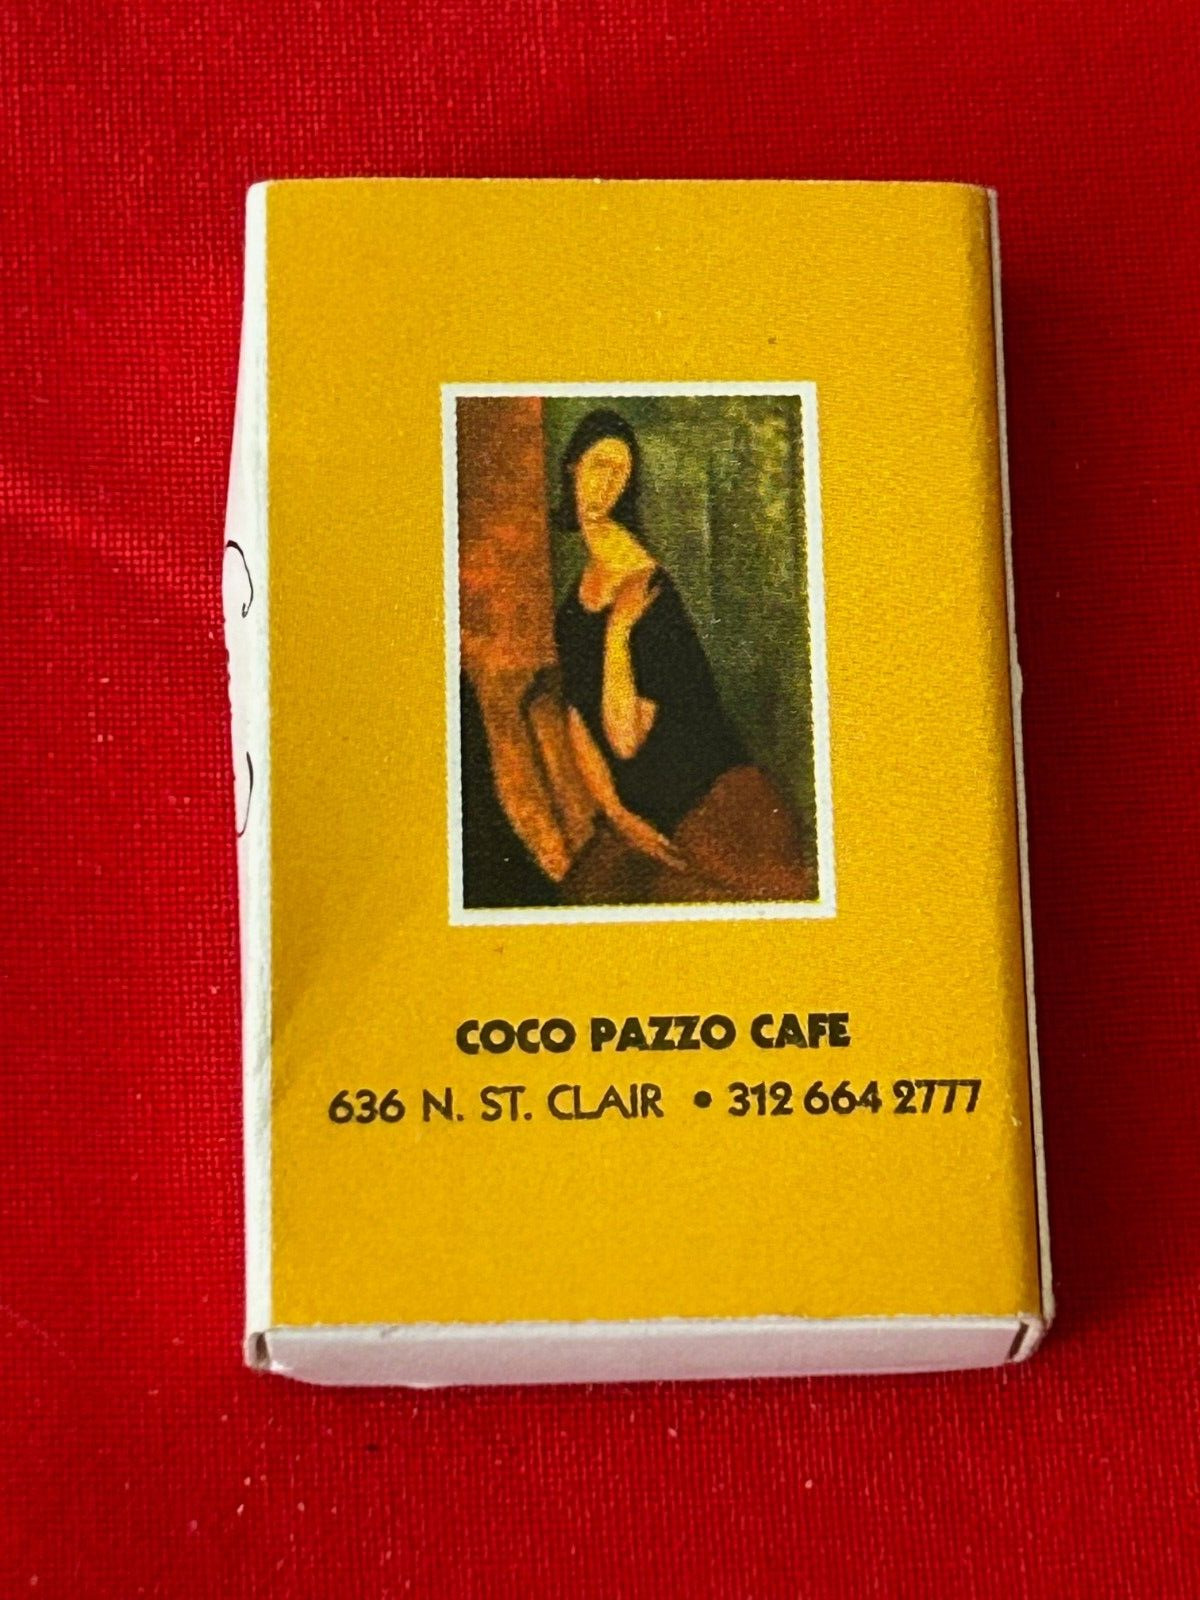 Coco Pazzo Cafe Chicago Illinois N. St. Clair Matchbox